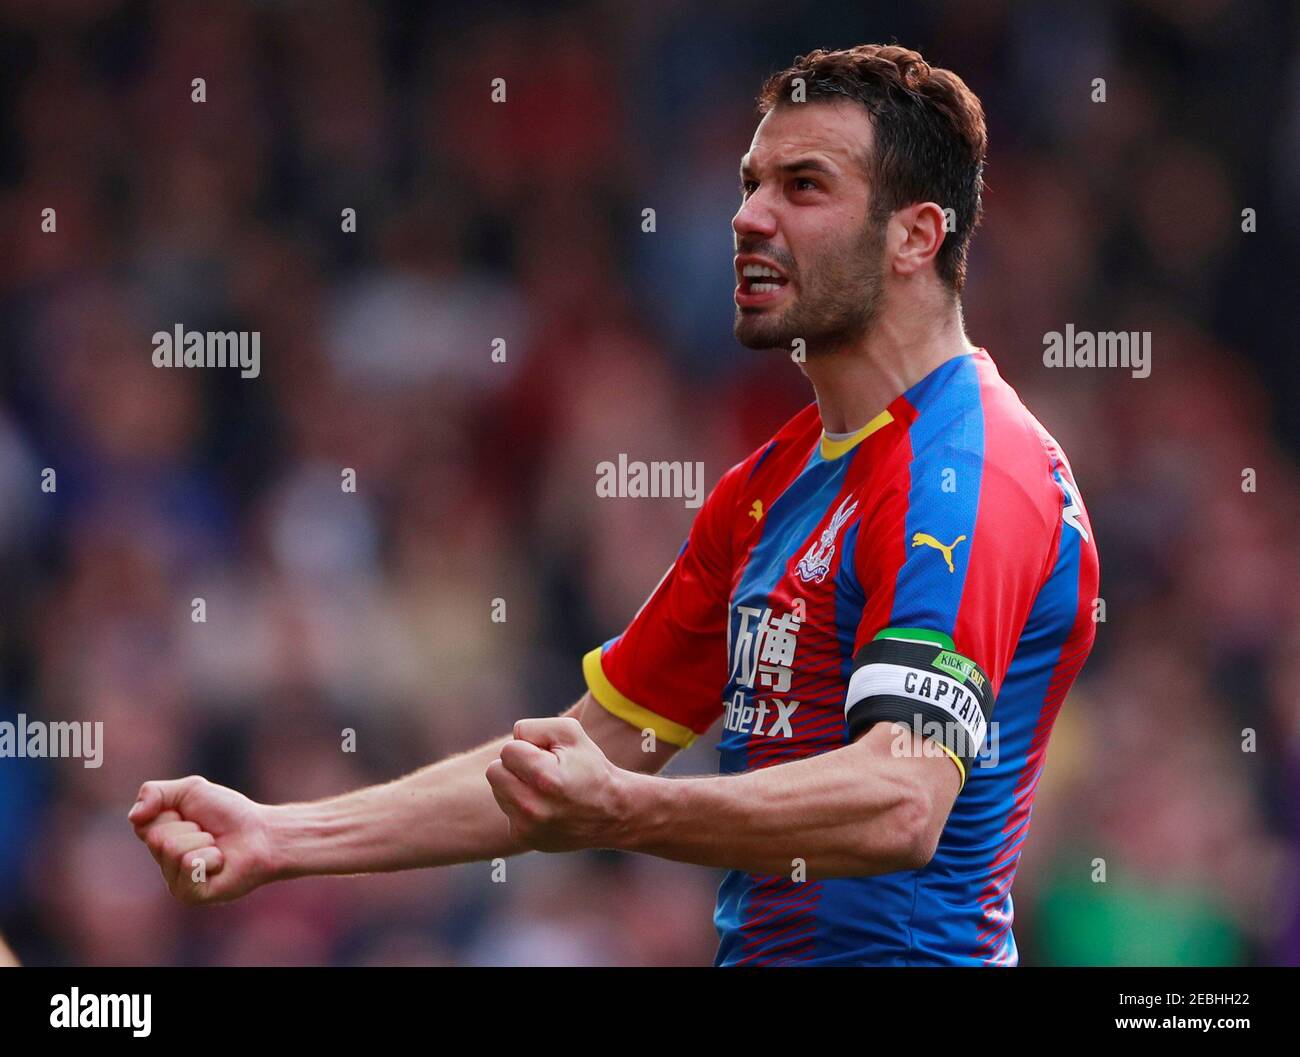 Soccer Football - Premier League - Crystal Palace v Huddersfield Town - Selhurst Park, London, Britain - March 30, 2019  Crystal Palace's Luka Milivojevic celebrates scoring their first goal    Action Images via Reuters/Andrew Couldridge  EDITORIAL USE ONLY. No use with unauthorized audio, video, data, fixture lists, club/league logos or 'live' services. Online in-match use limited to 75 images, no video emulation. No use in betting, games or single club/league/player publications.  Please contact your account representative for further details. Stock Photo